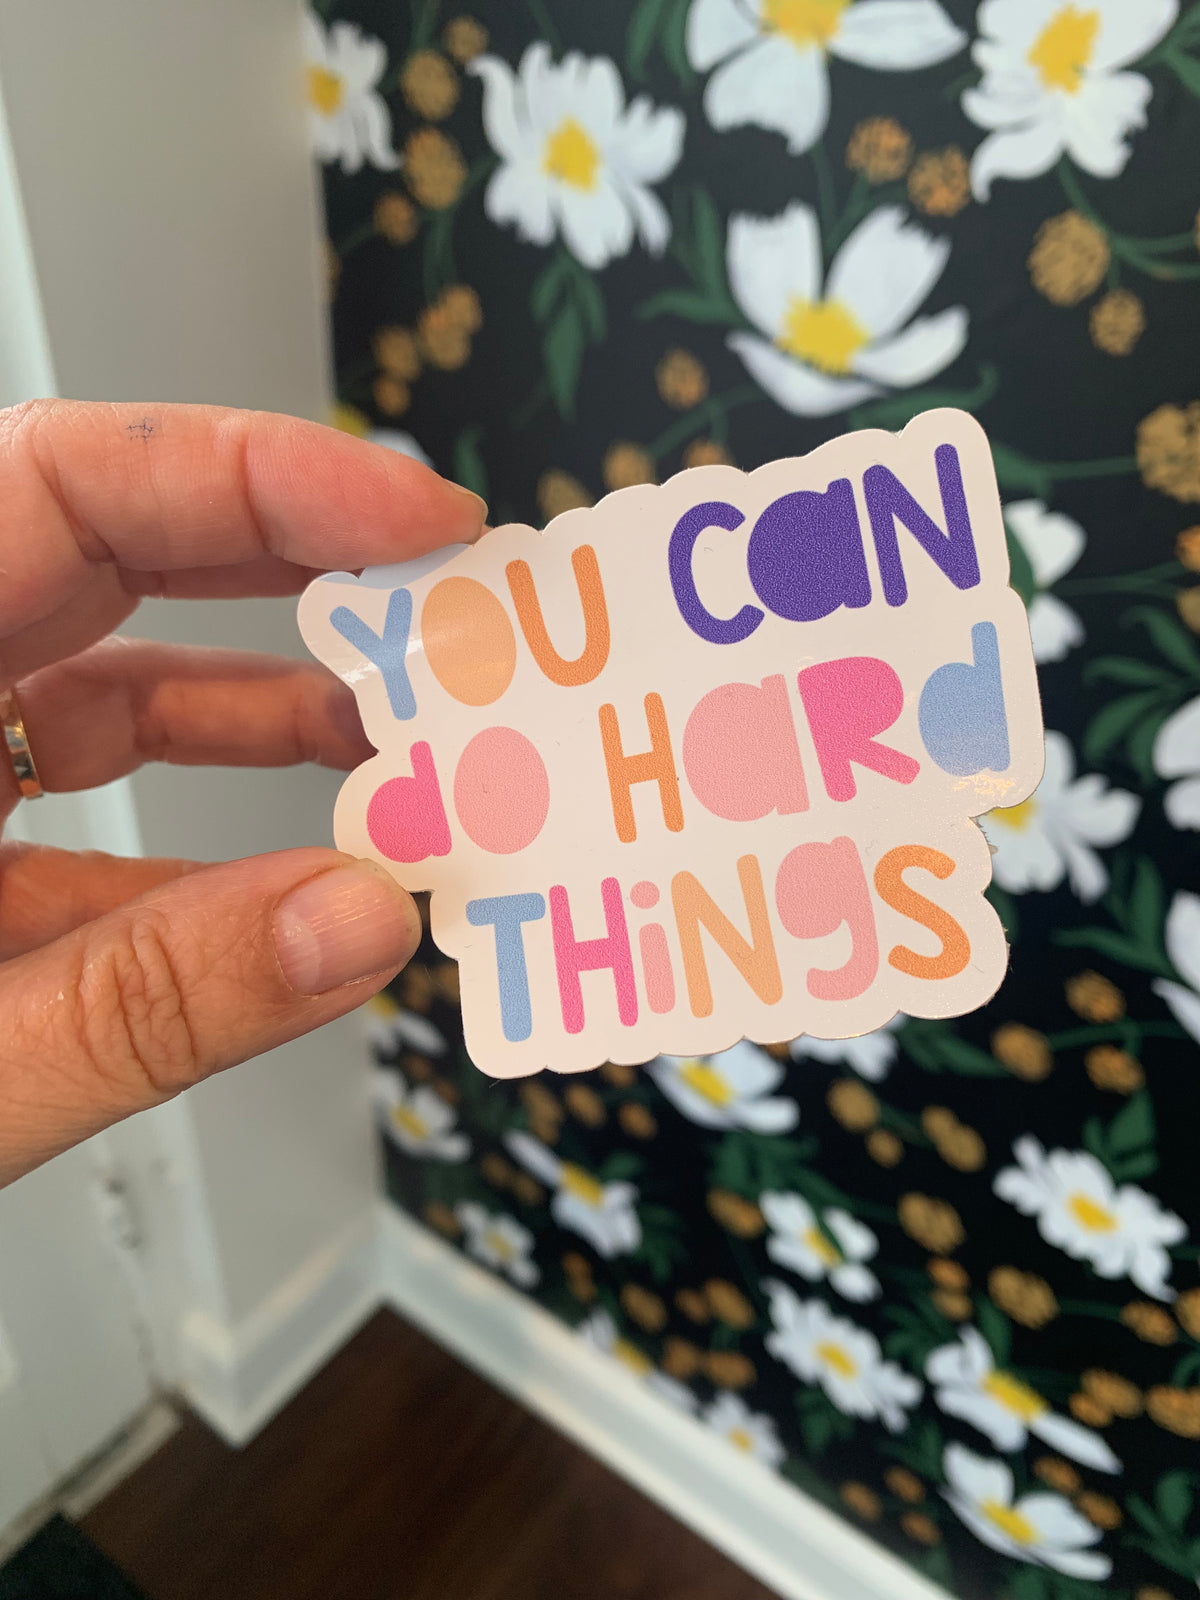 You can do hard things sticker